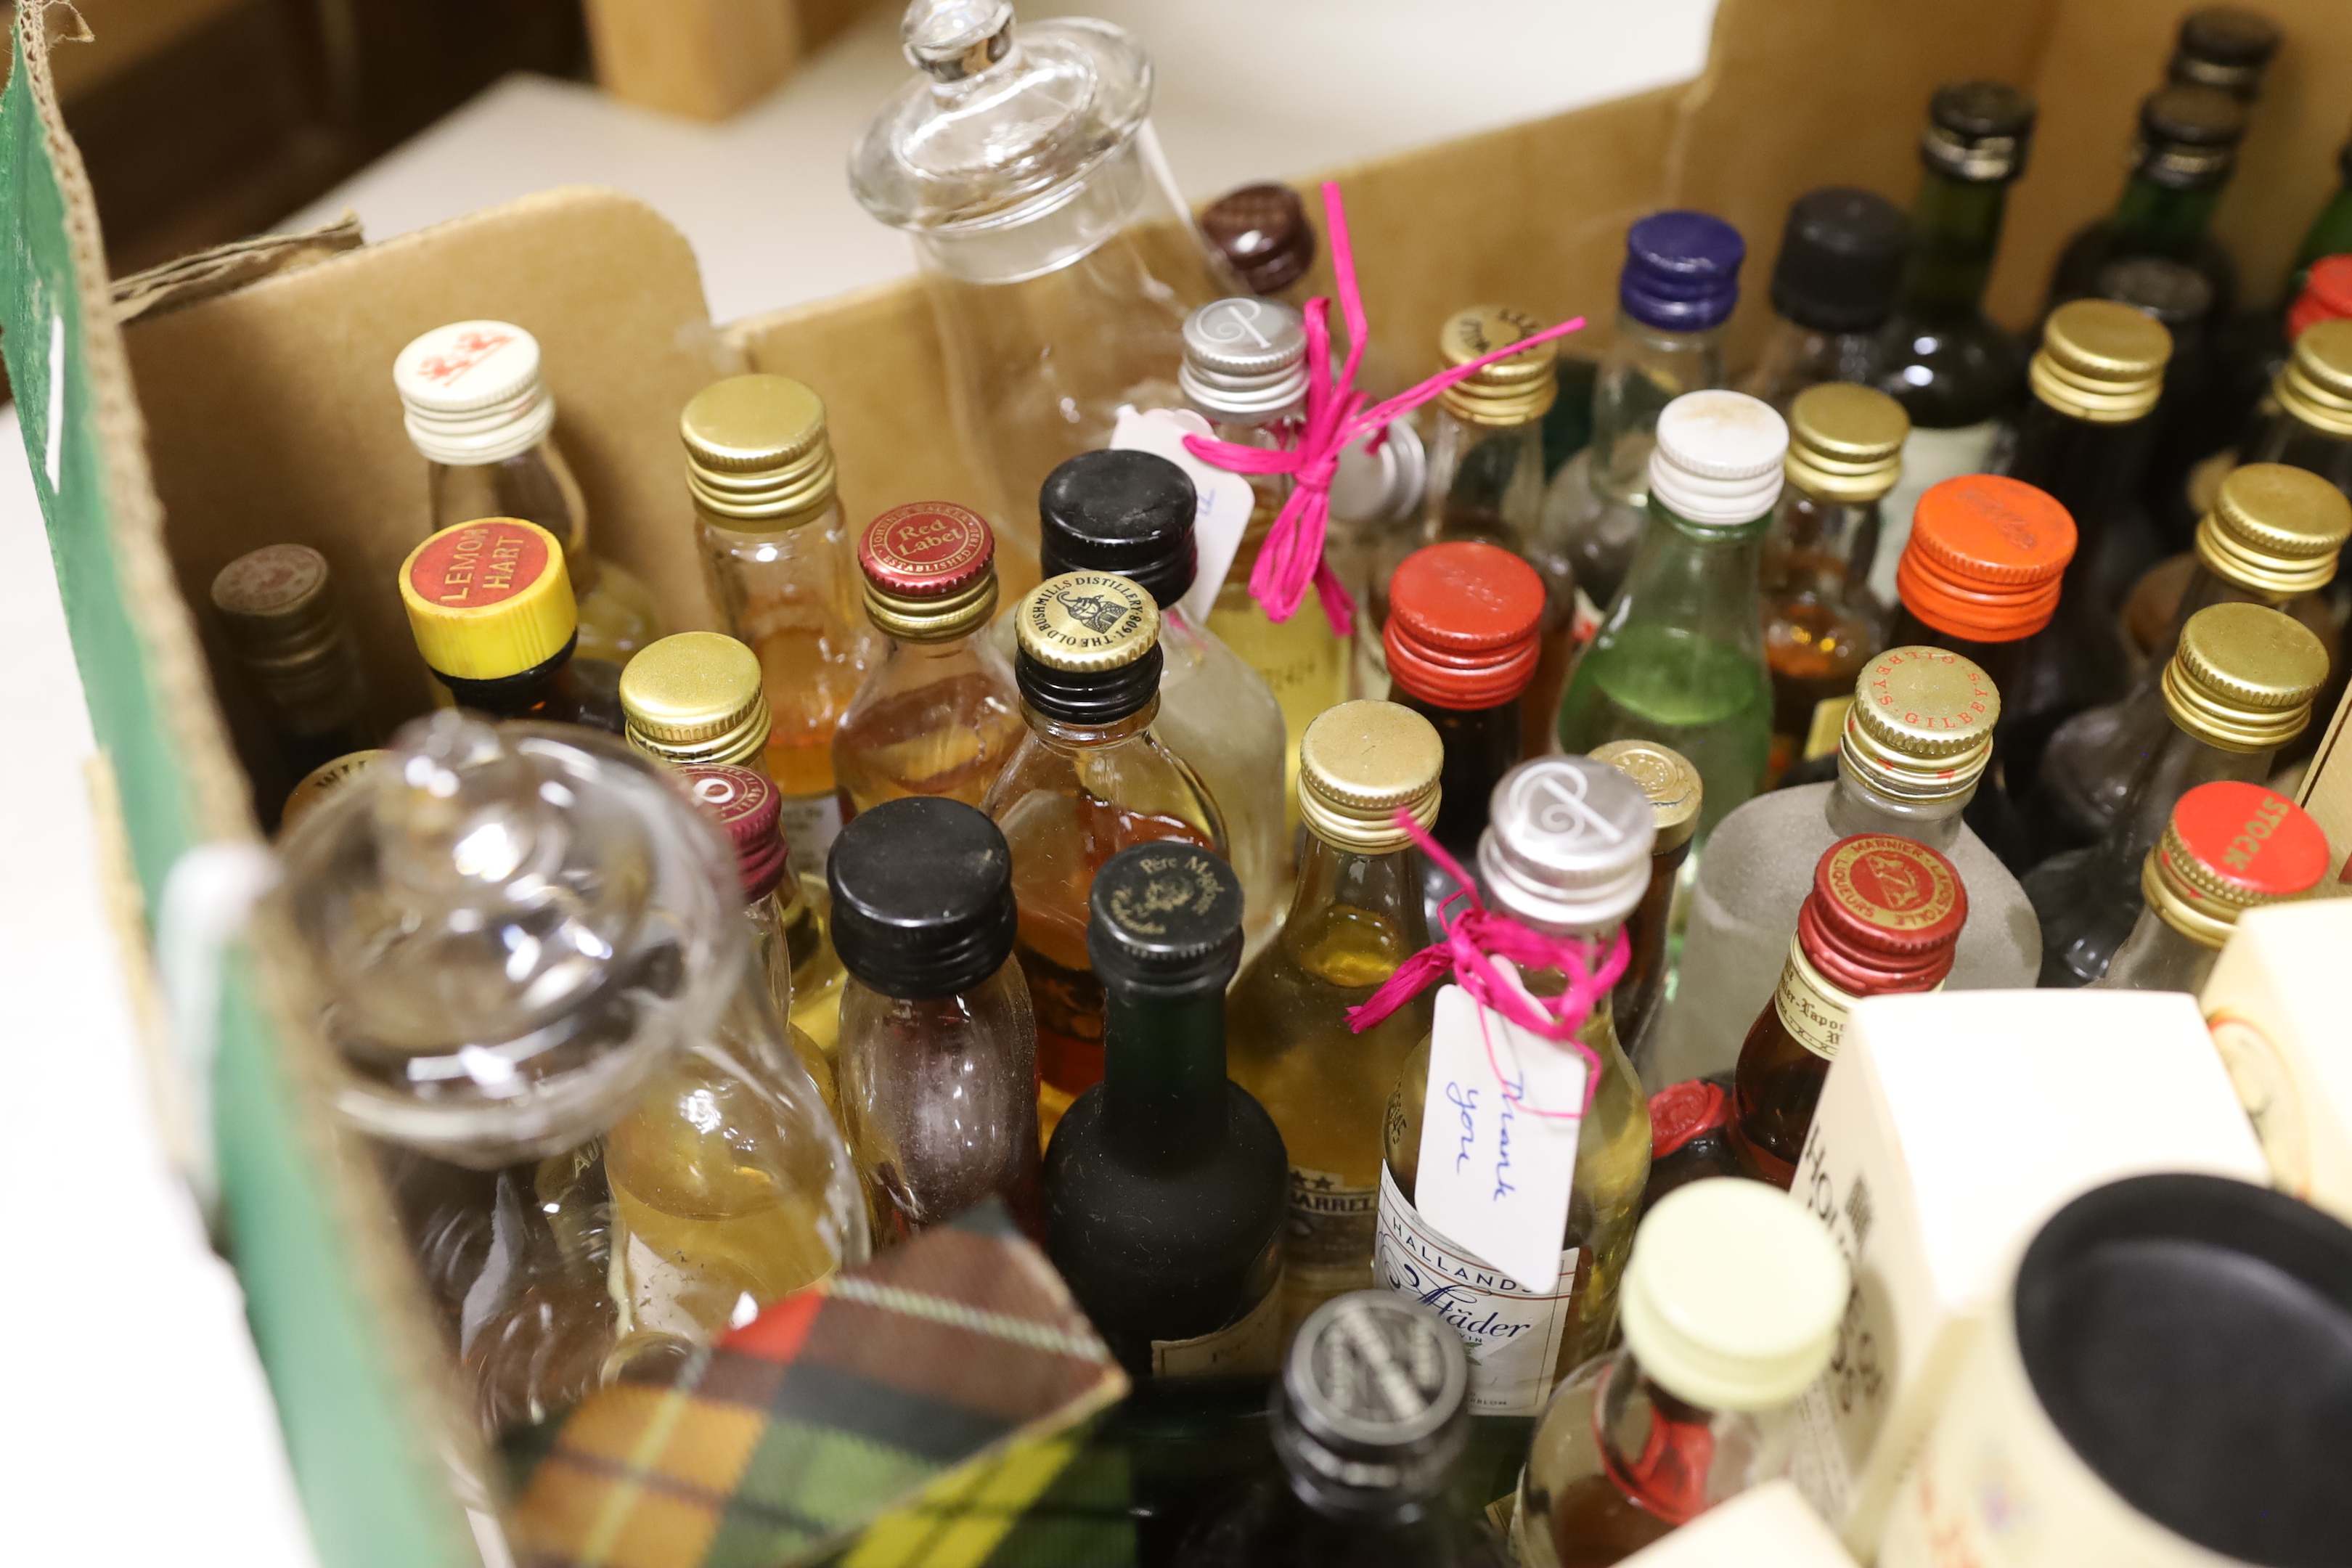 A quantity of various miniature bottled spirits to include single malt whisky